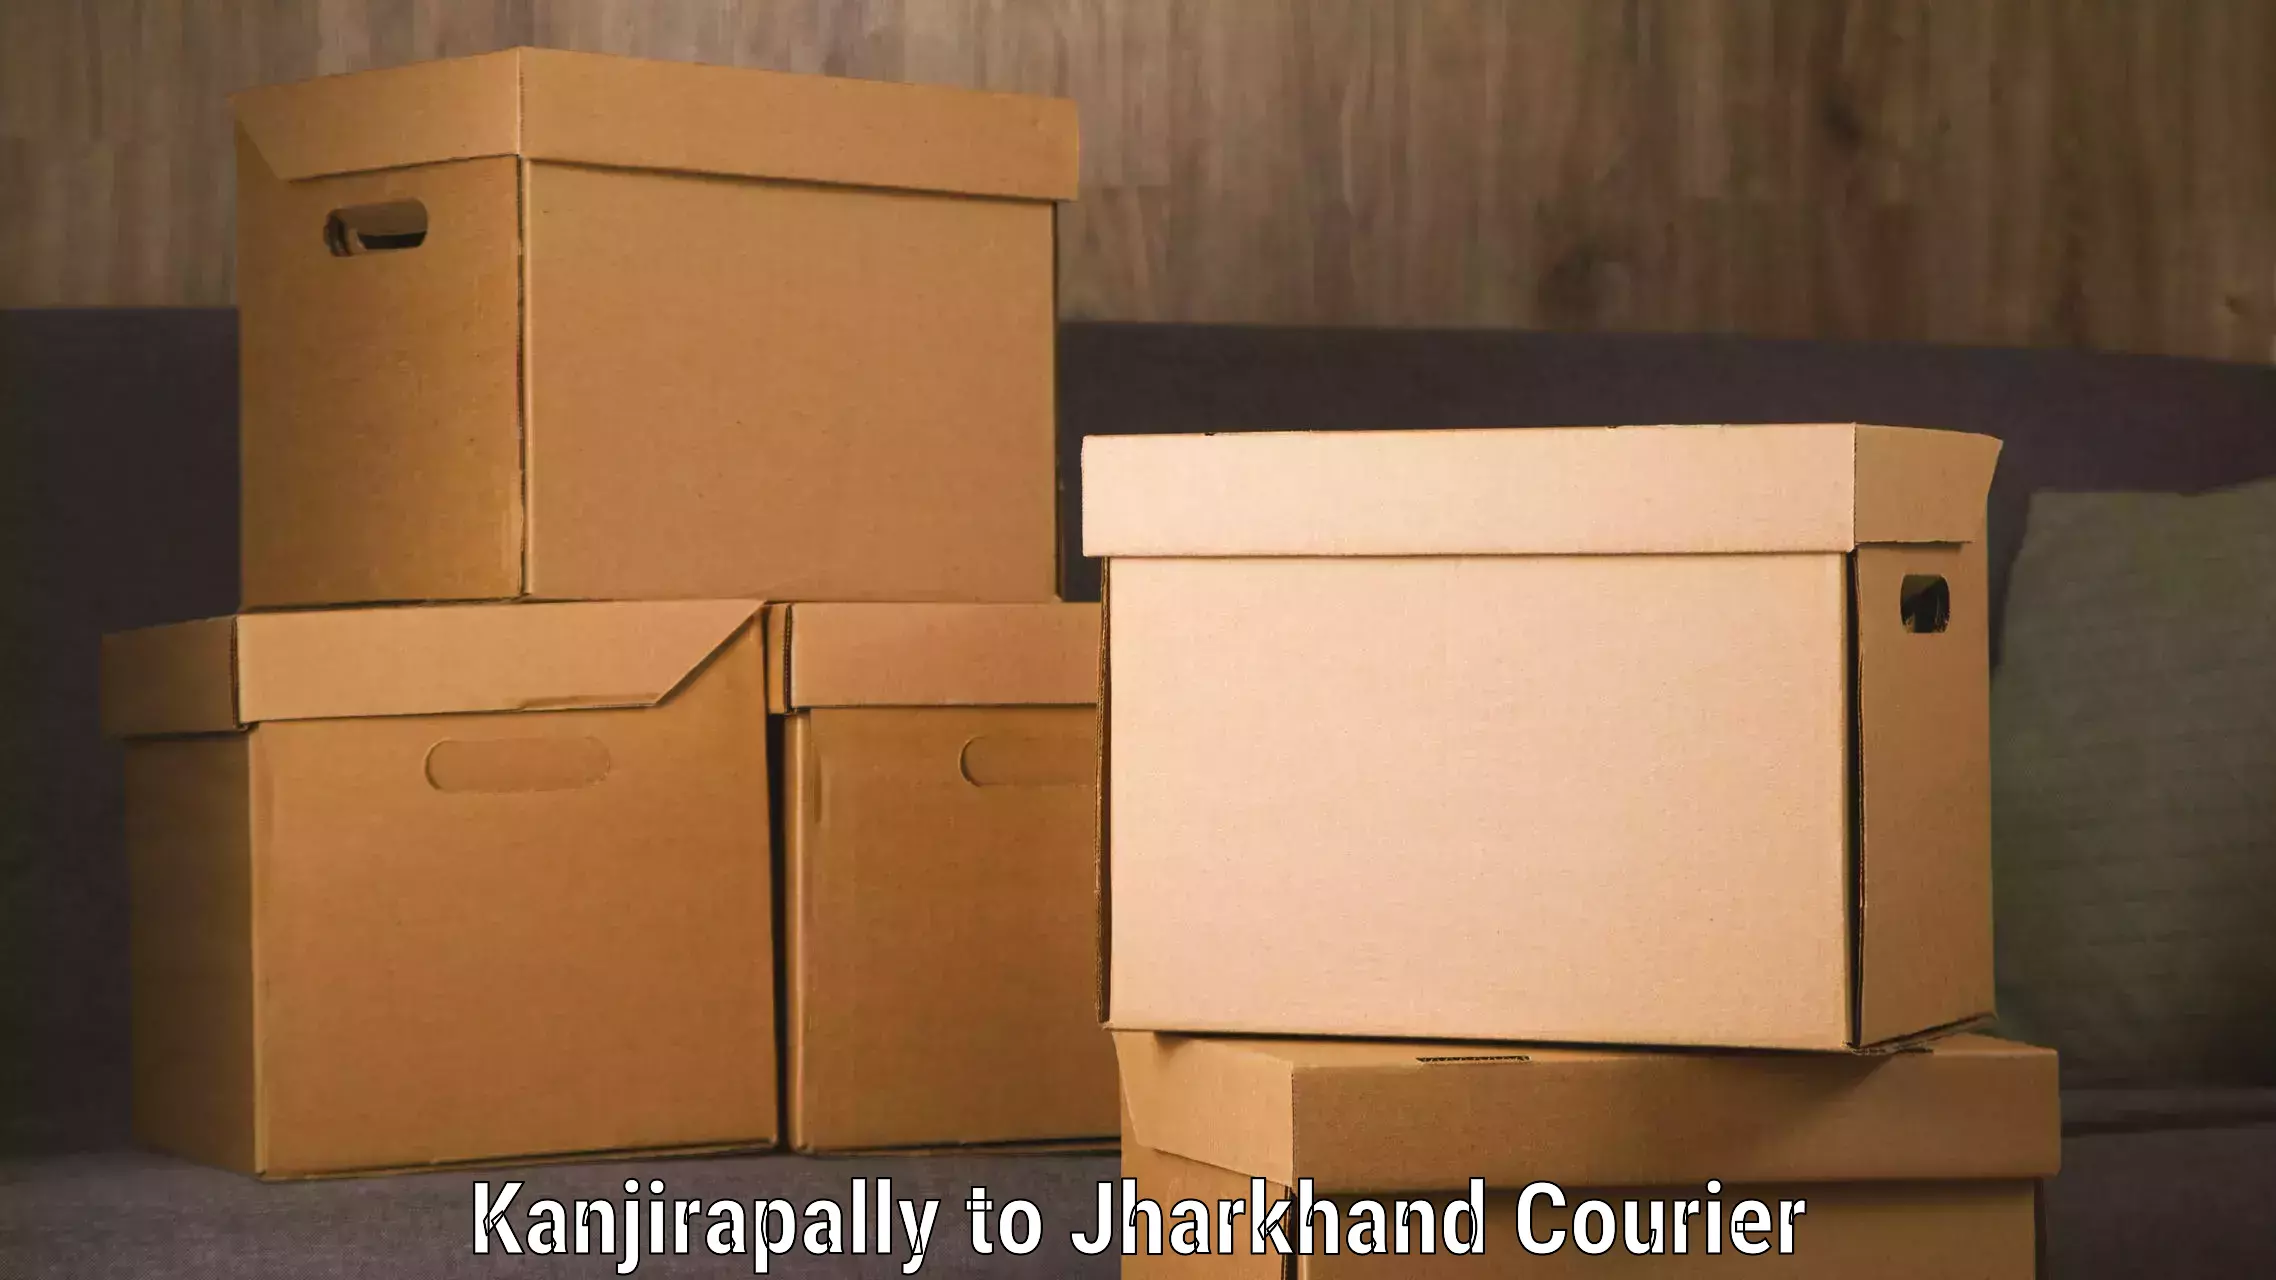 Courier service comparison Kanjirapally to Domchanch